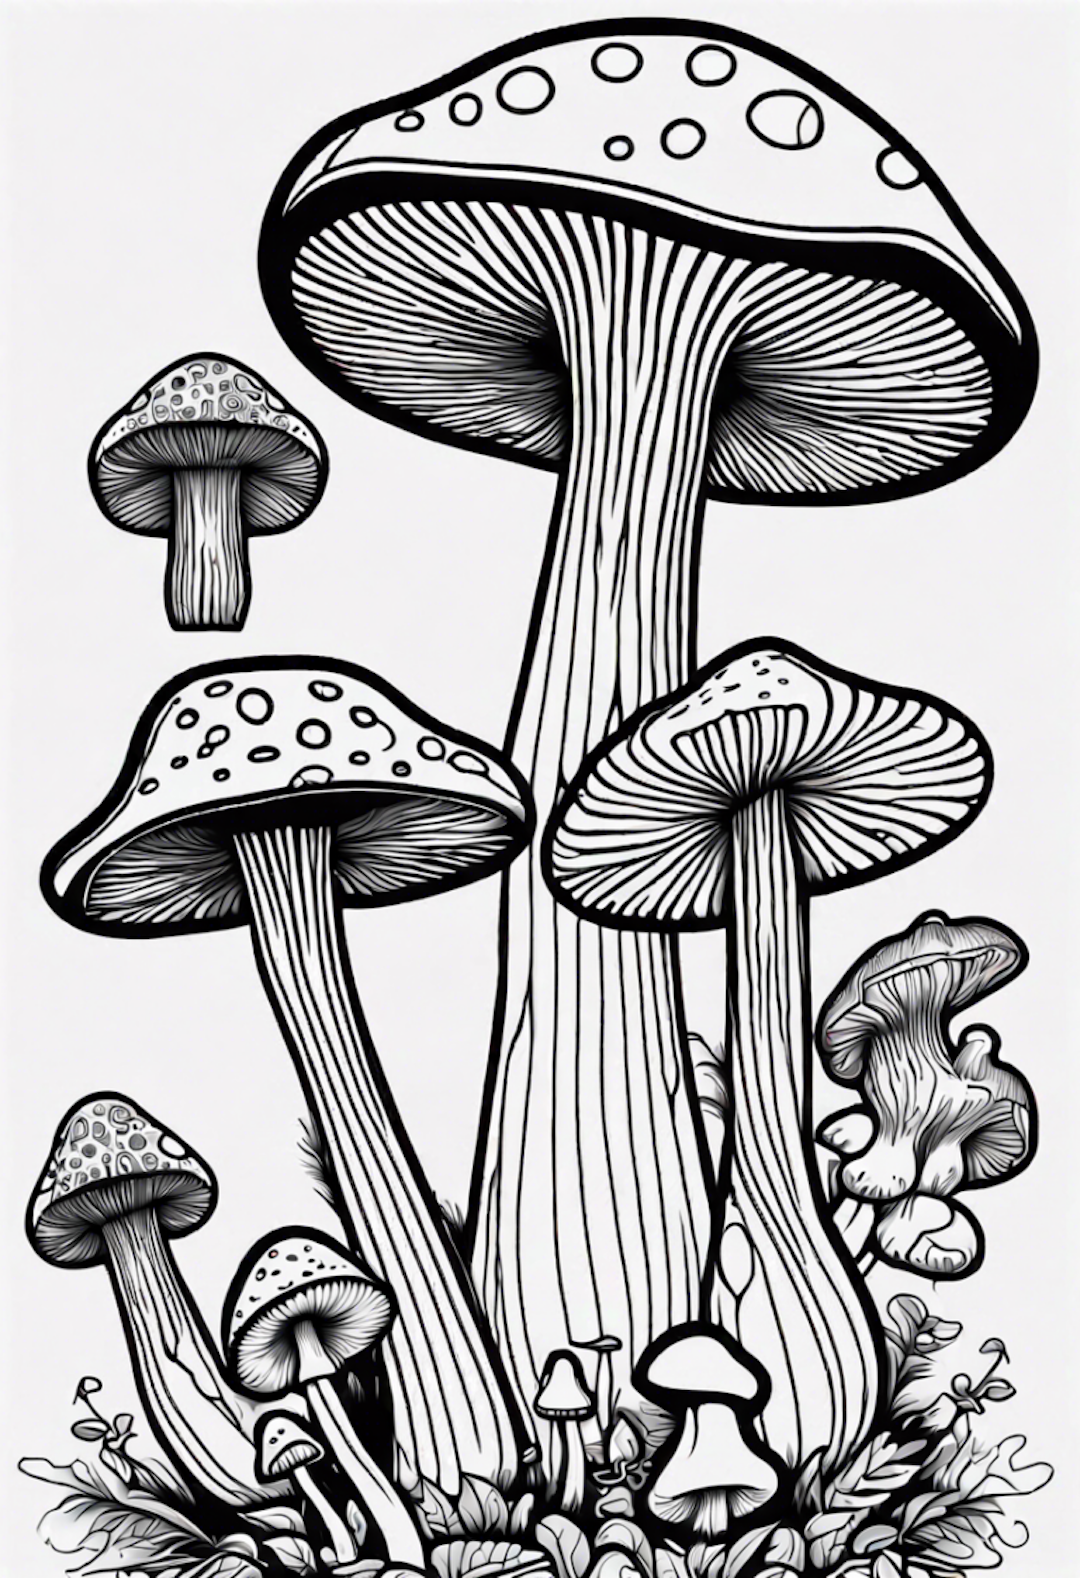 Psychedelic Mushroom Patterns coloring pages